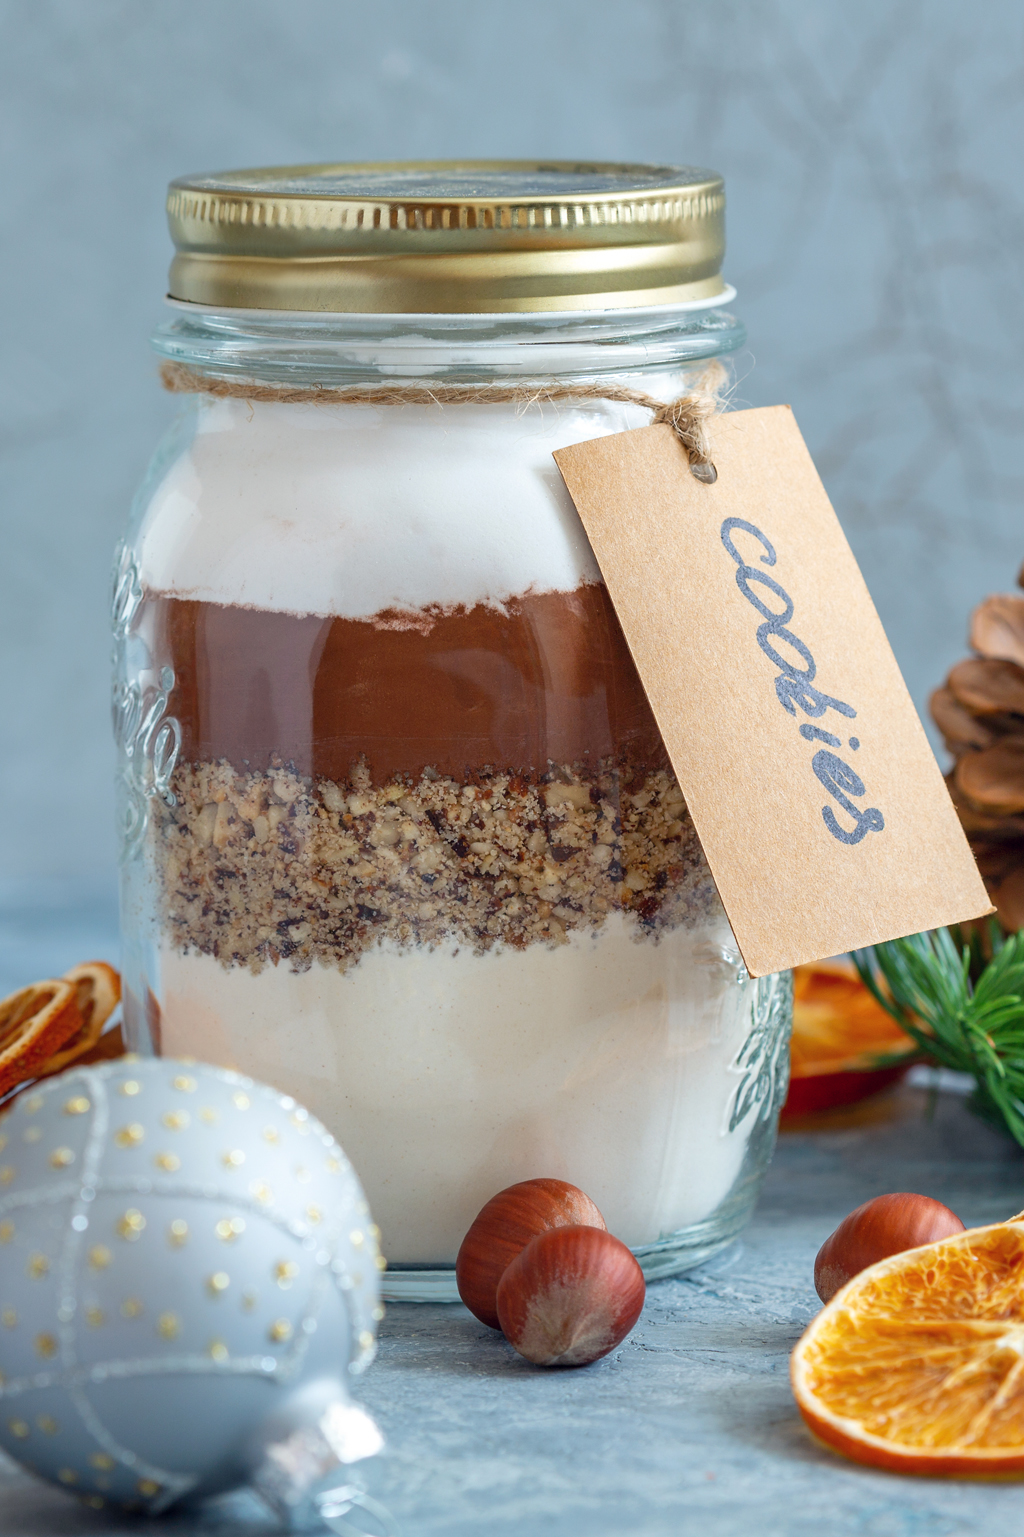 Glass jar with ingredients for baking chocolate nut cookies